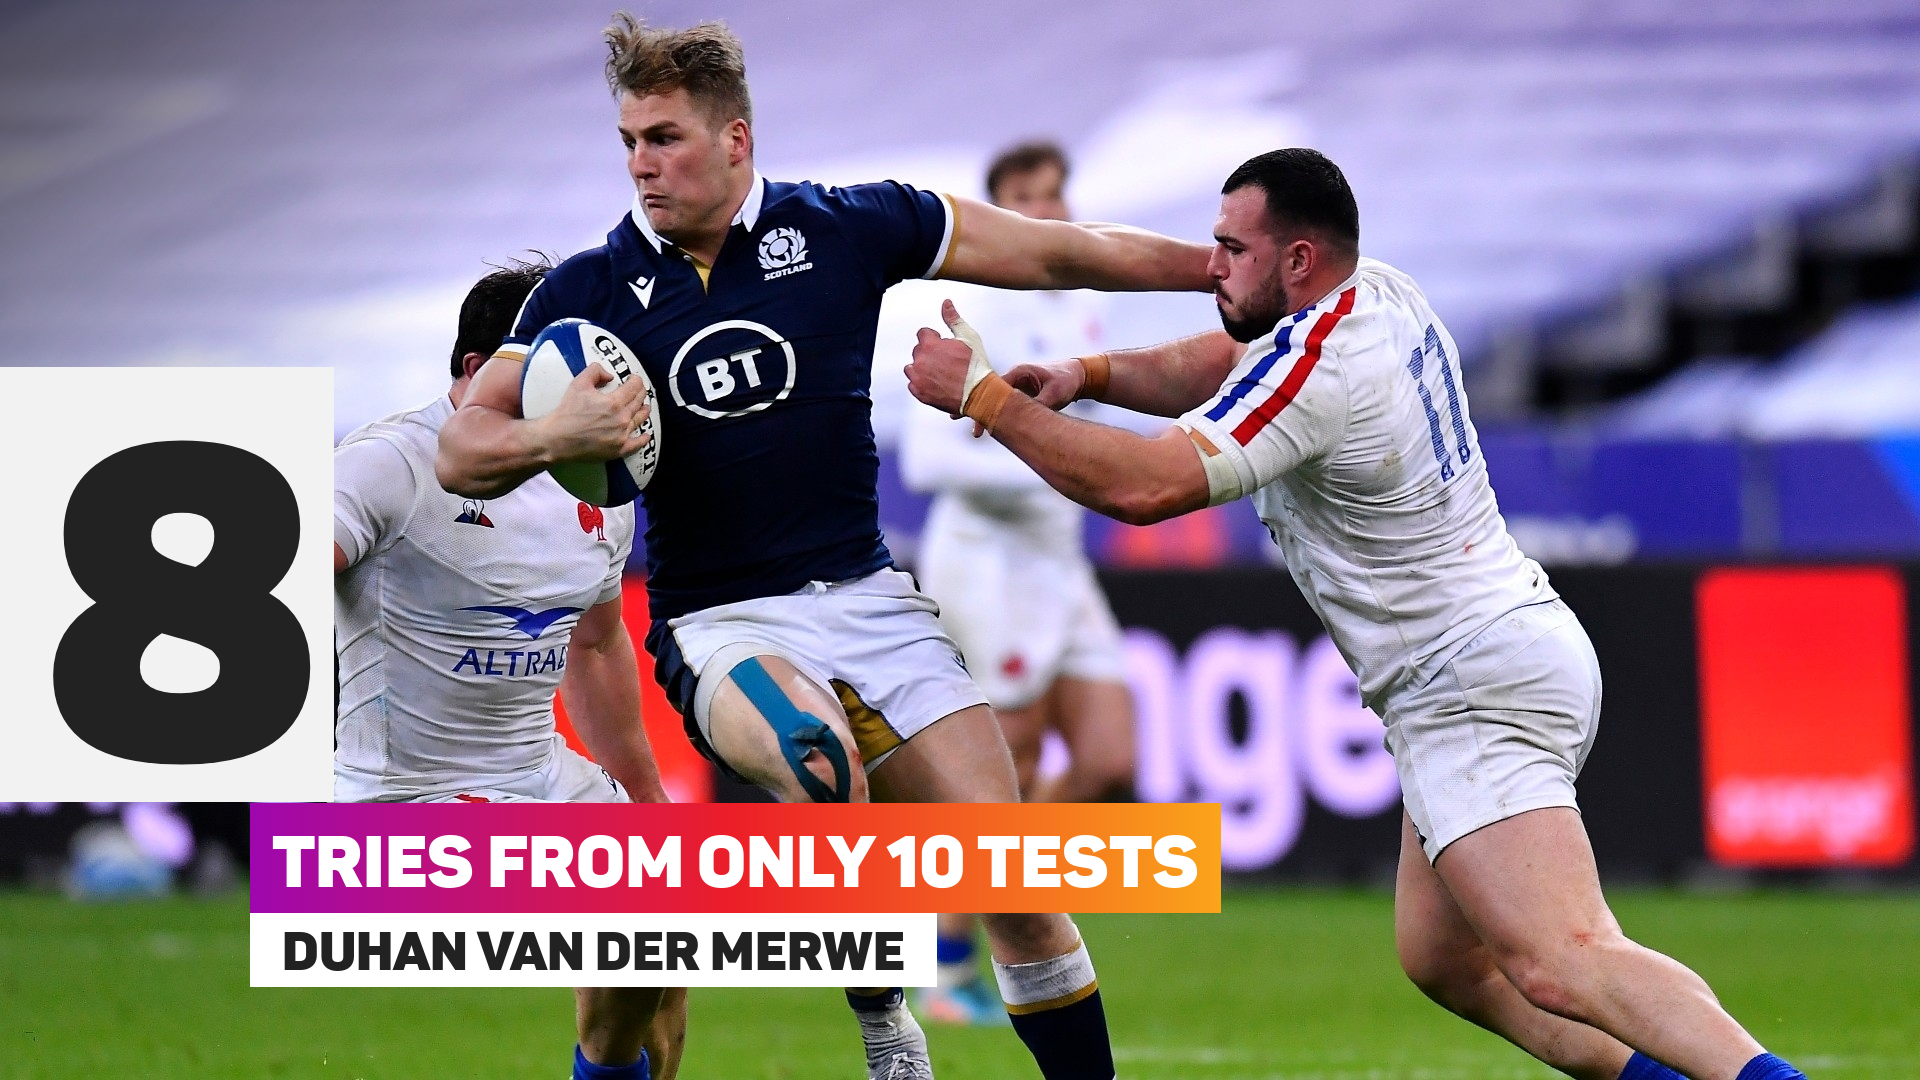 Duhan van der Merwe has scored 8 tries from 10 test matches